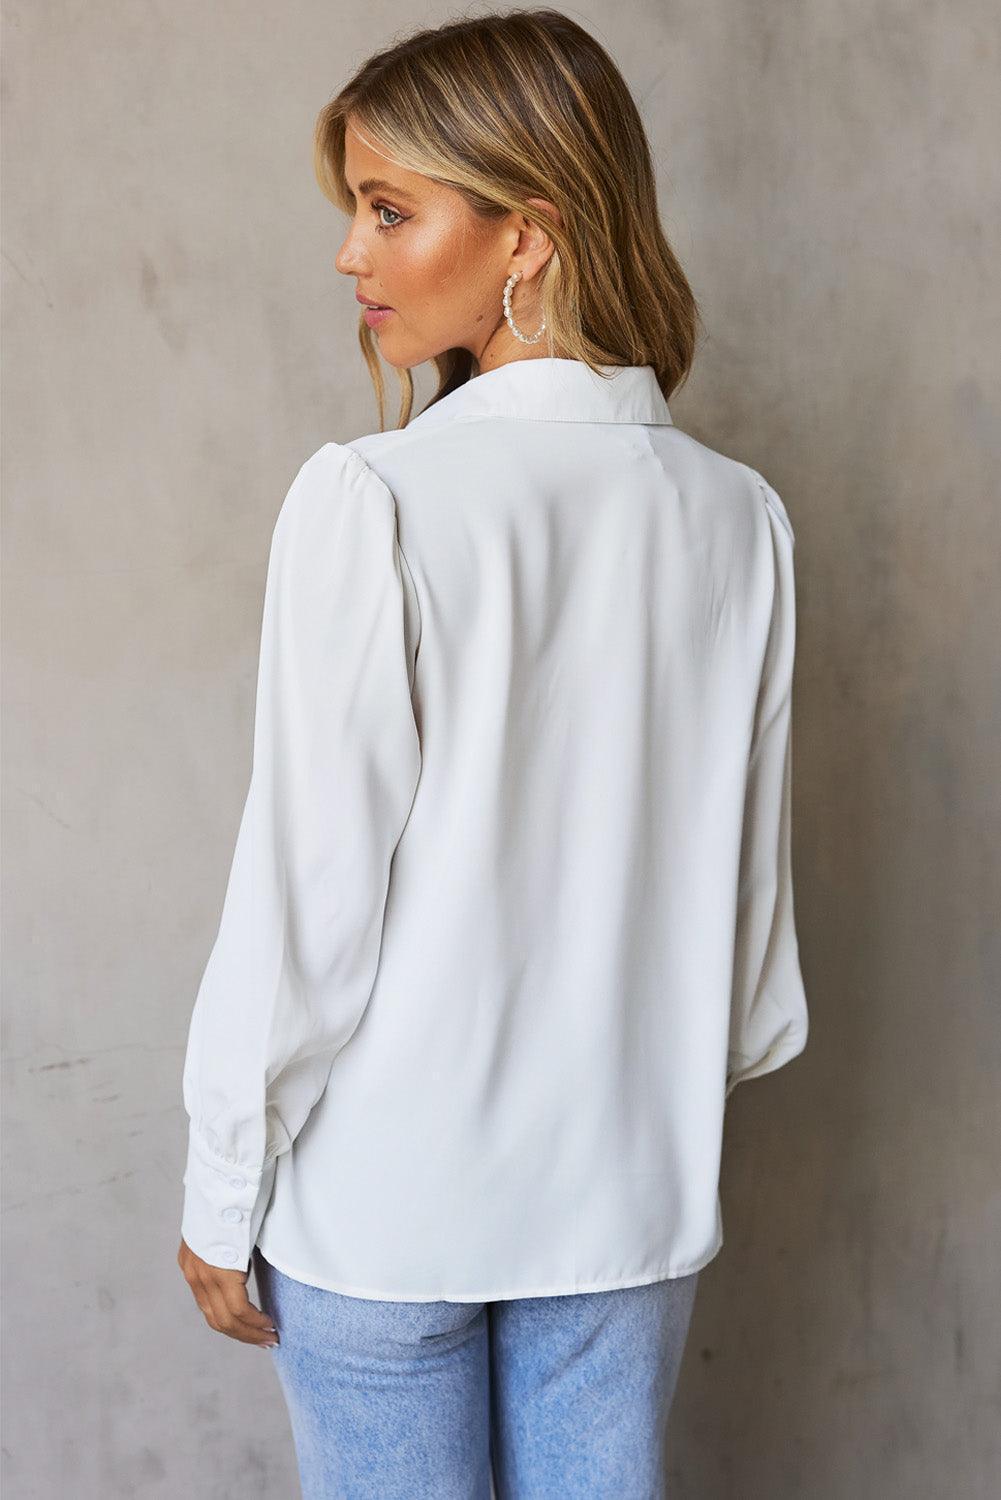 Free and Easy Buttoned Puff Long Sleeve Shirt - MXSTUDIO.COM